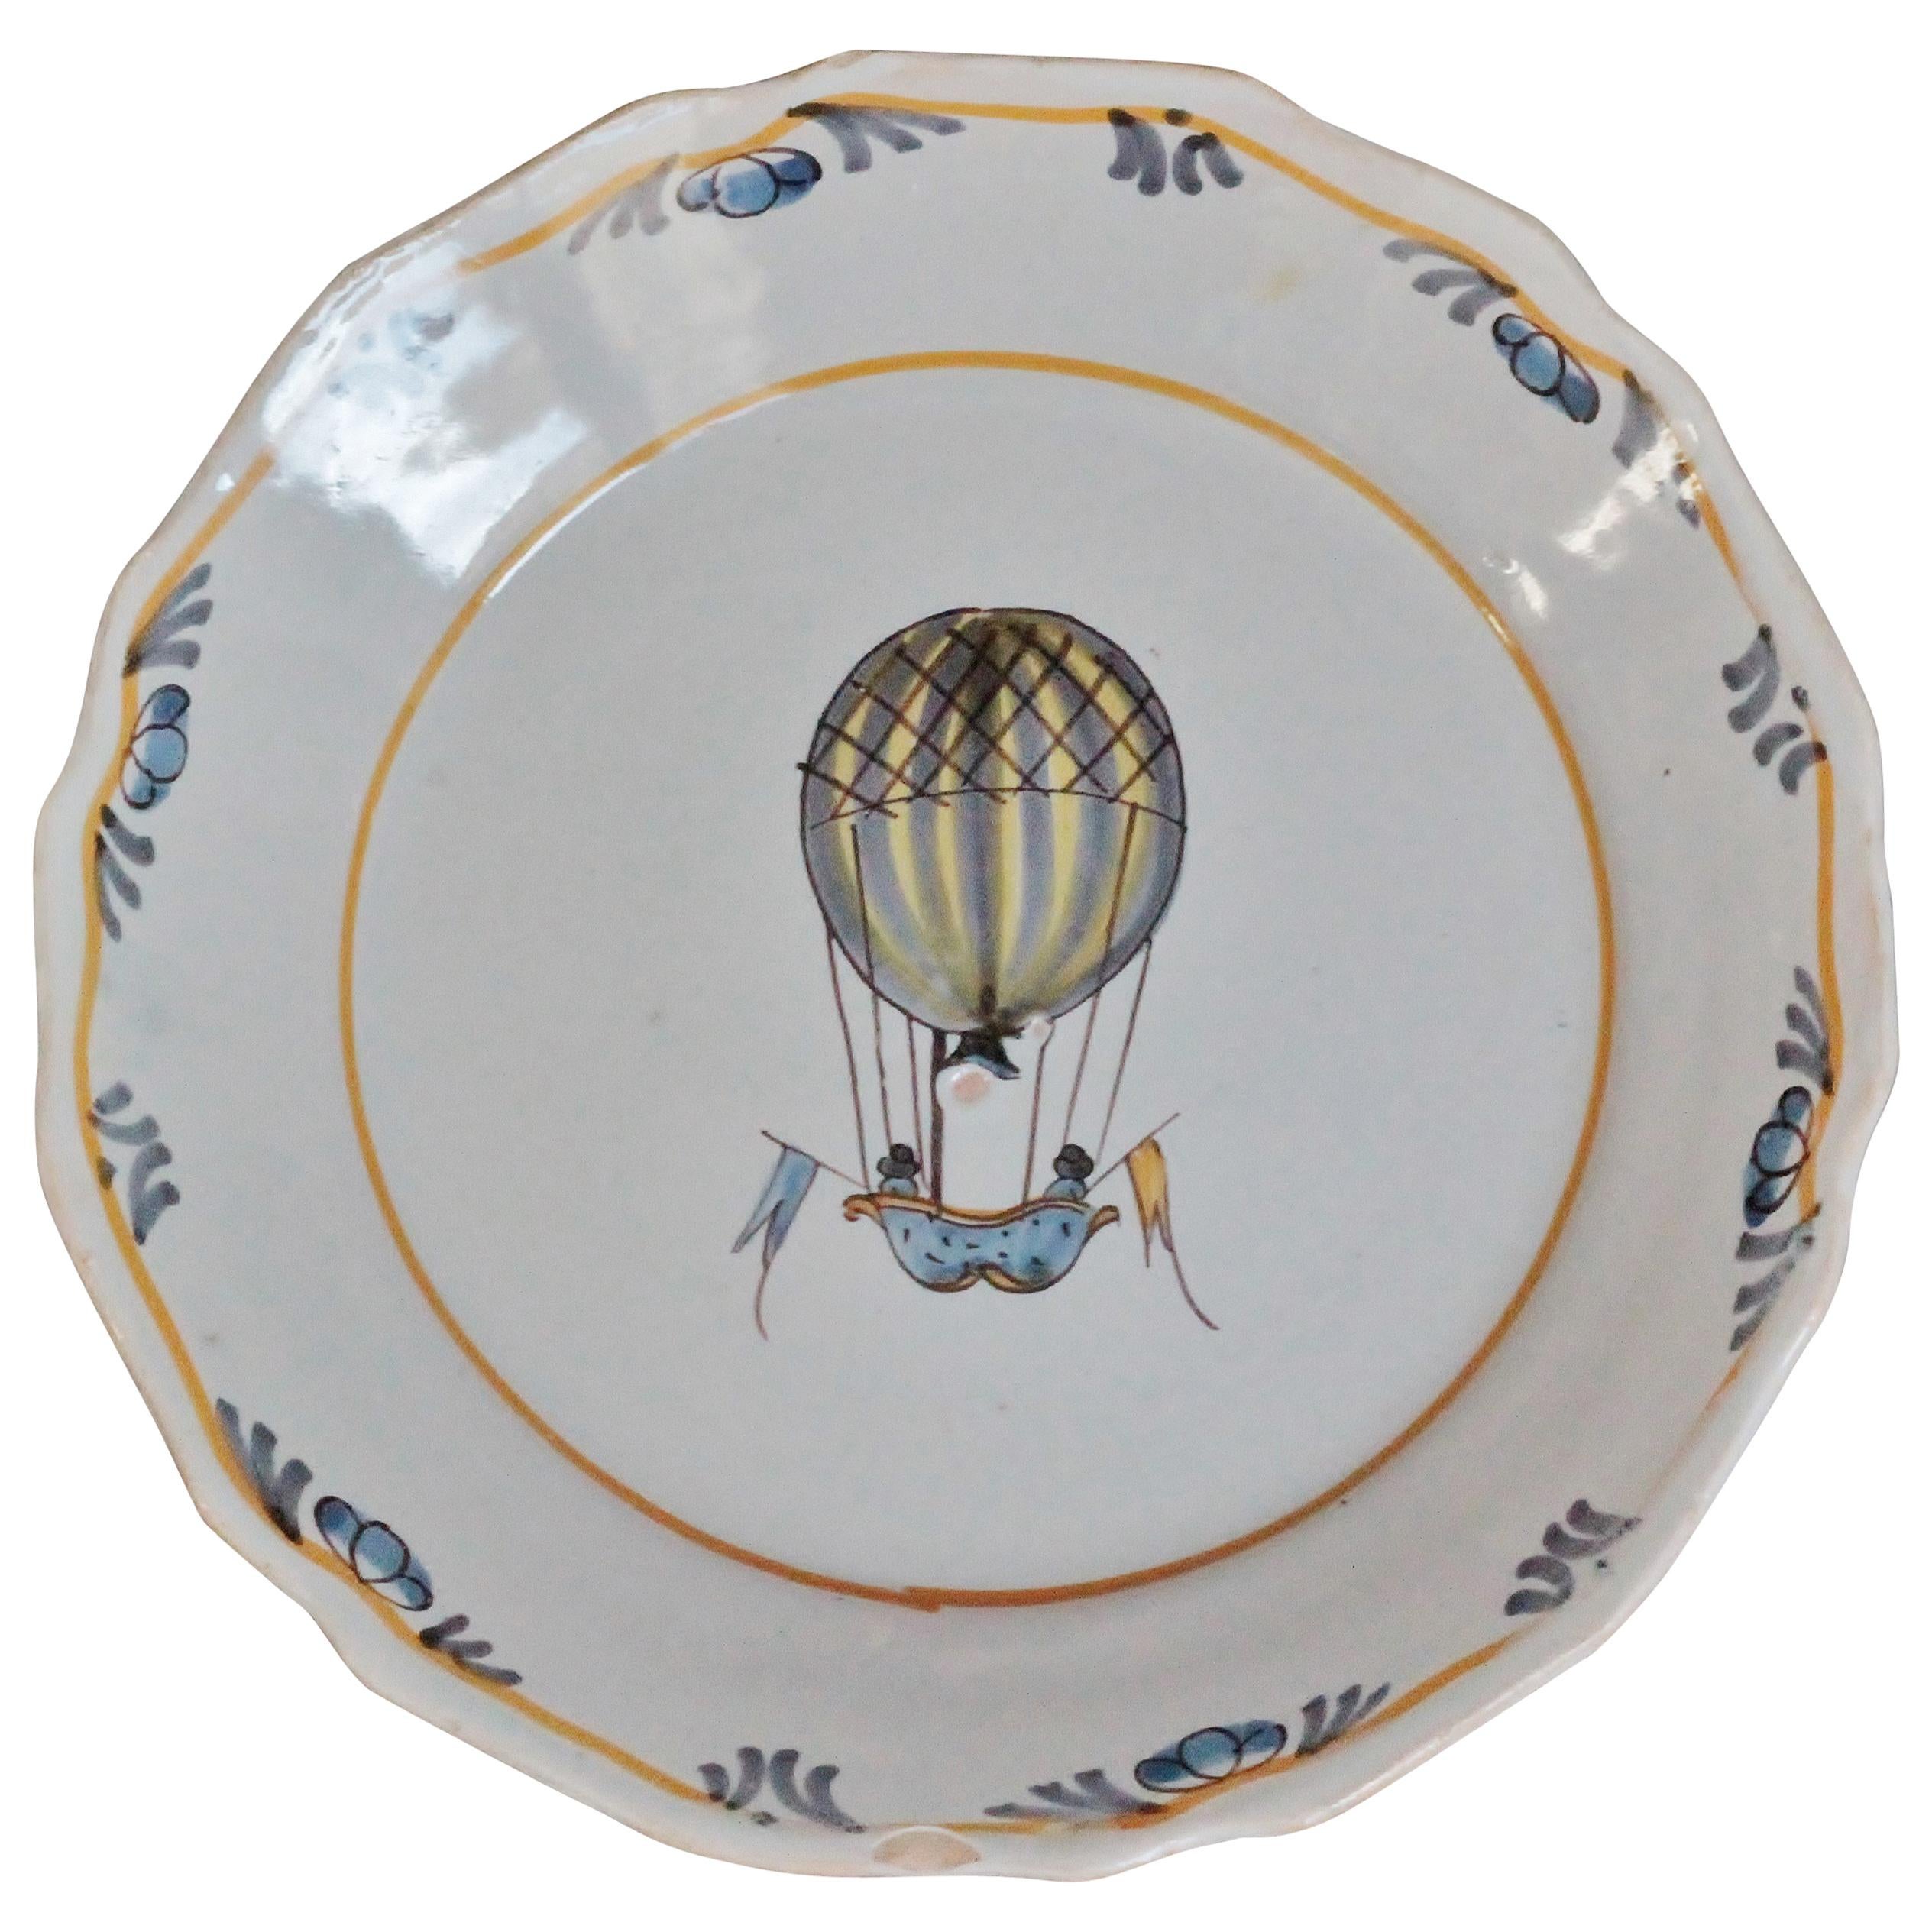 Nevers 'France' Faience Plate with "Balloon" Decoration, 18th Century For Sale